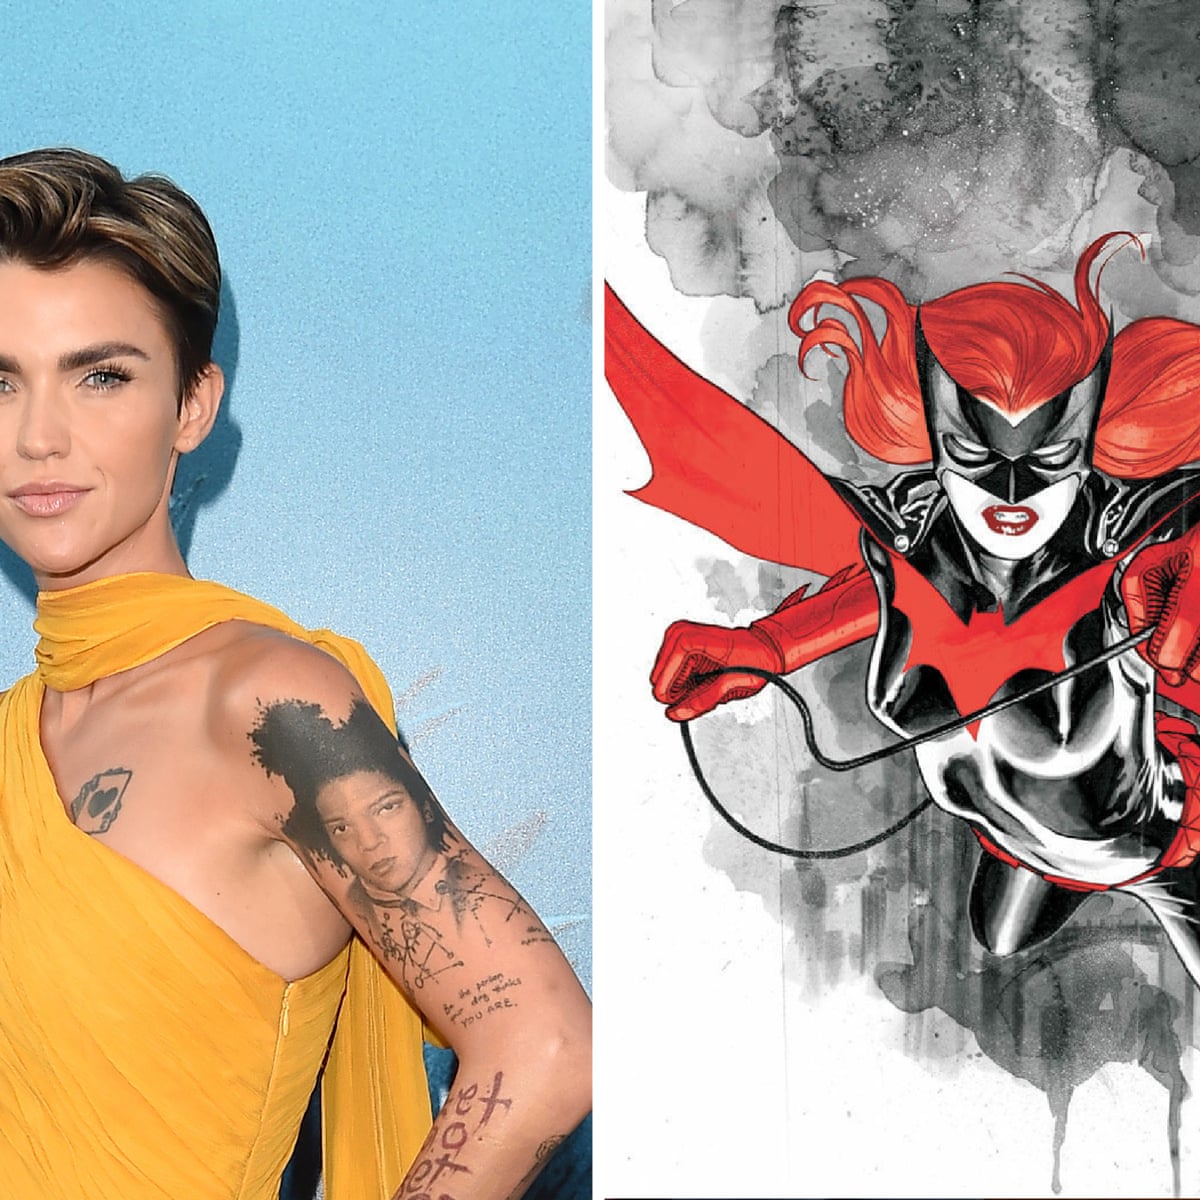 Ruby Rose cast as lesbian superhero Batwoman in new TV series | Ruby Rose |  The Guardian